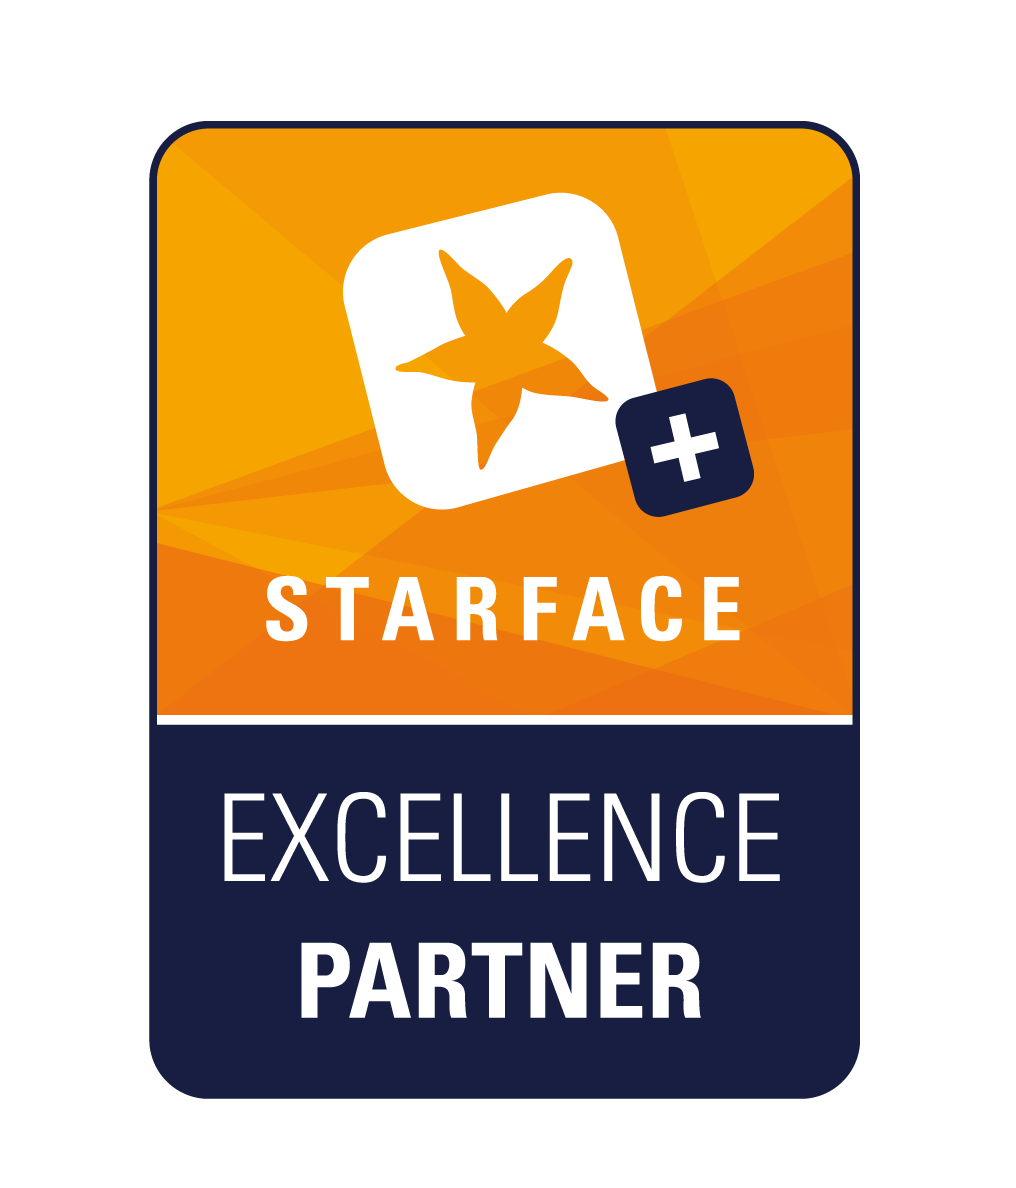 STARFACE-Partner - Excellence plus